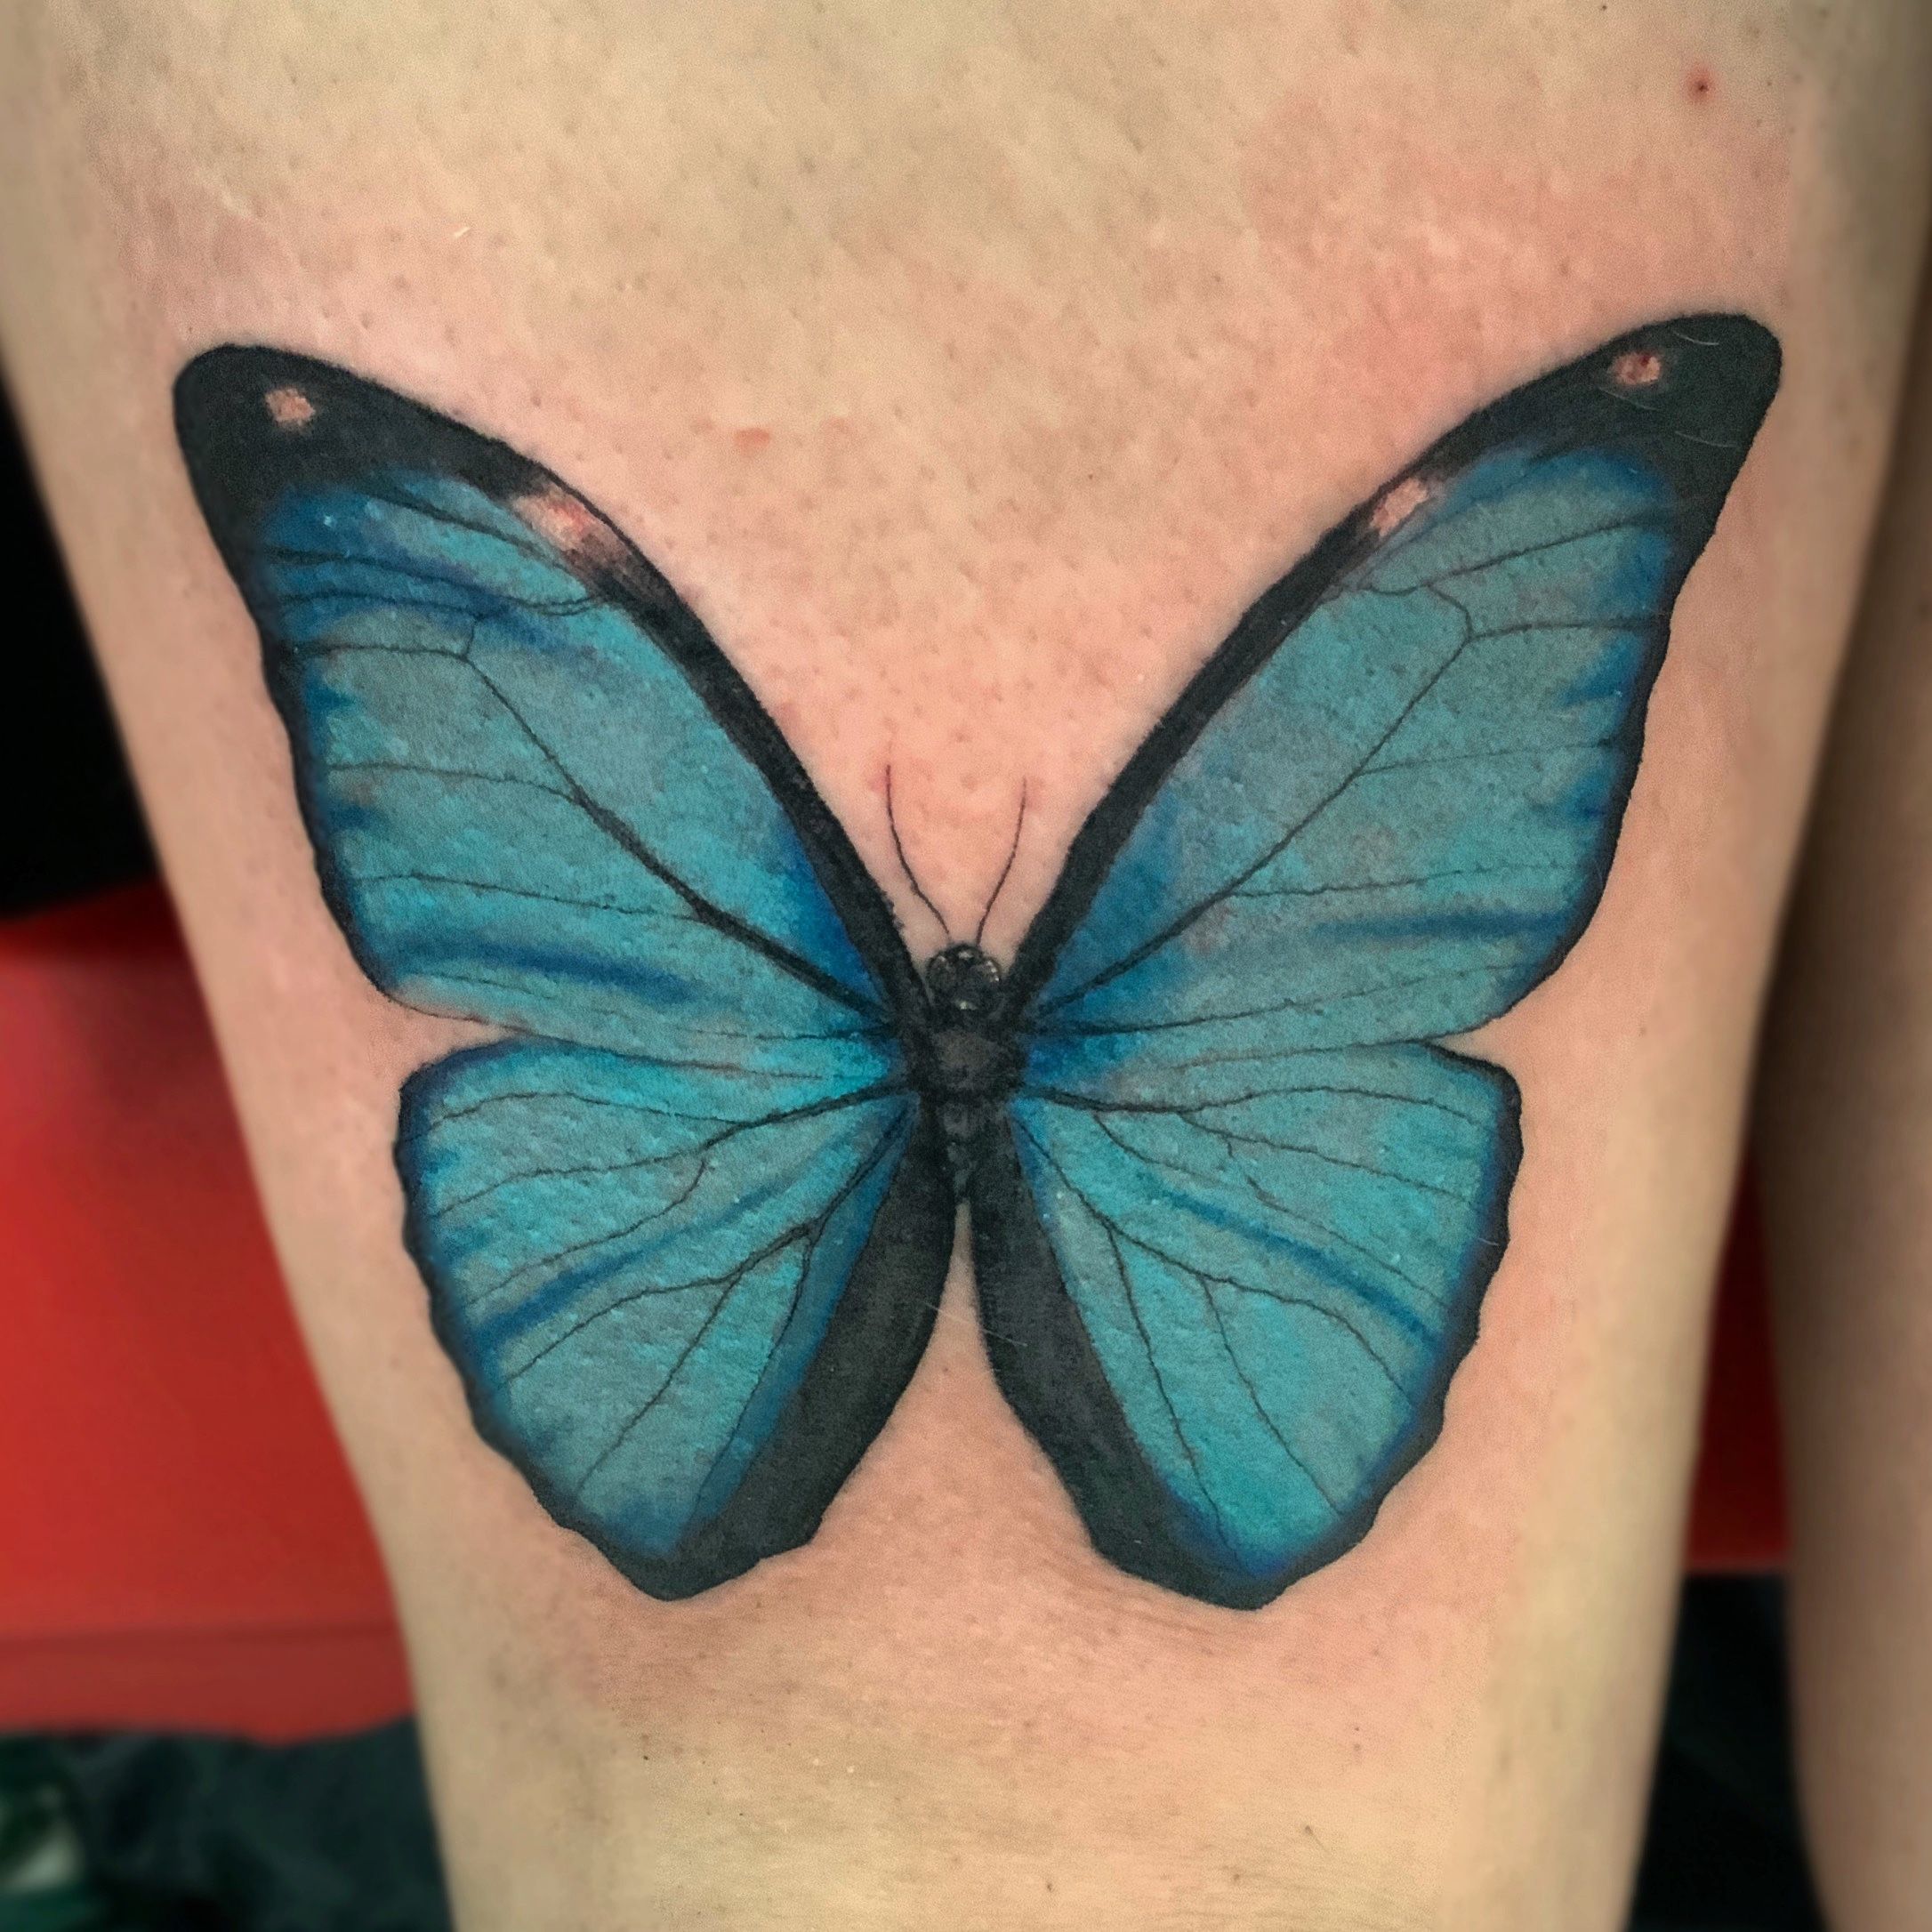 50 Stunning Butterfly Tattoos That Will Make You Feel Free and Sexy   Inspirationfeed